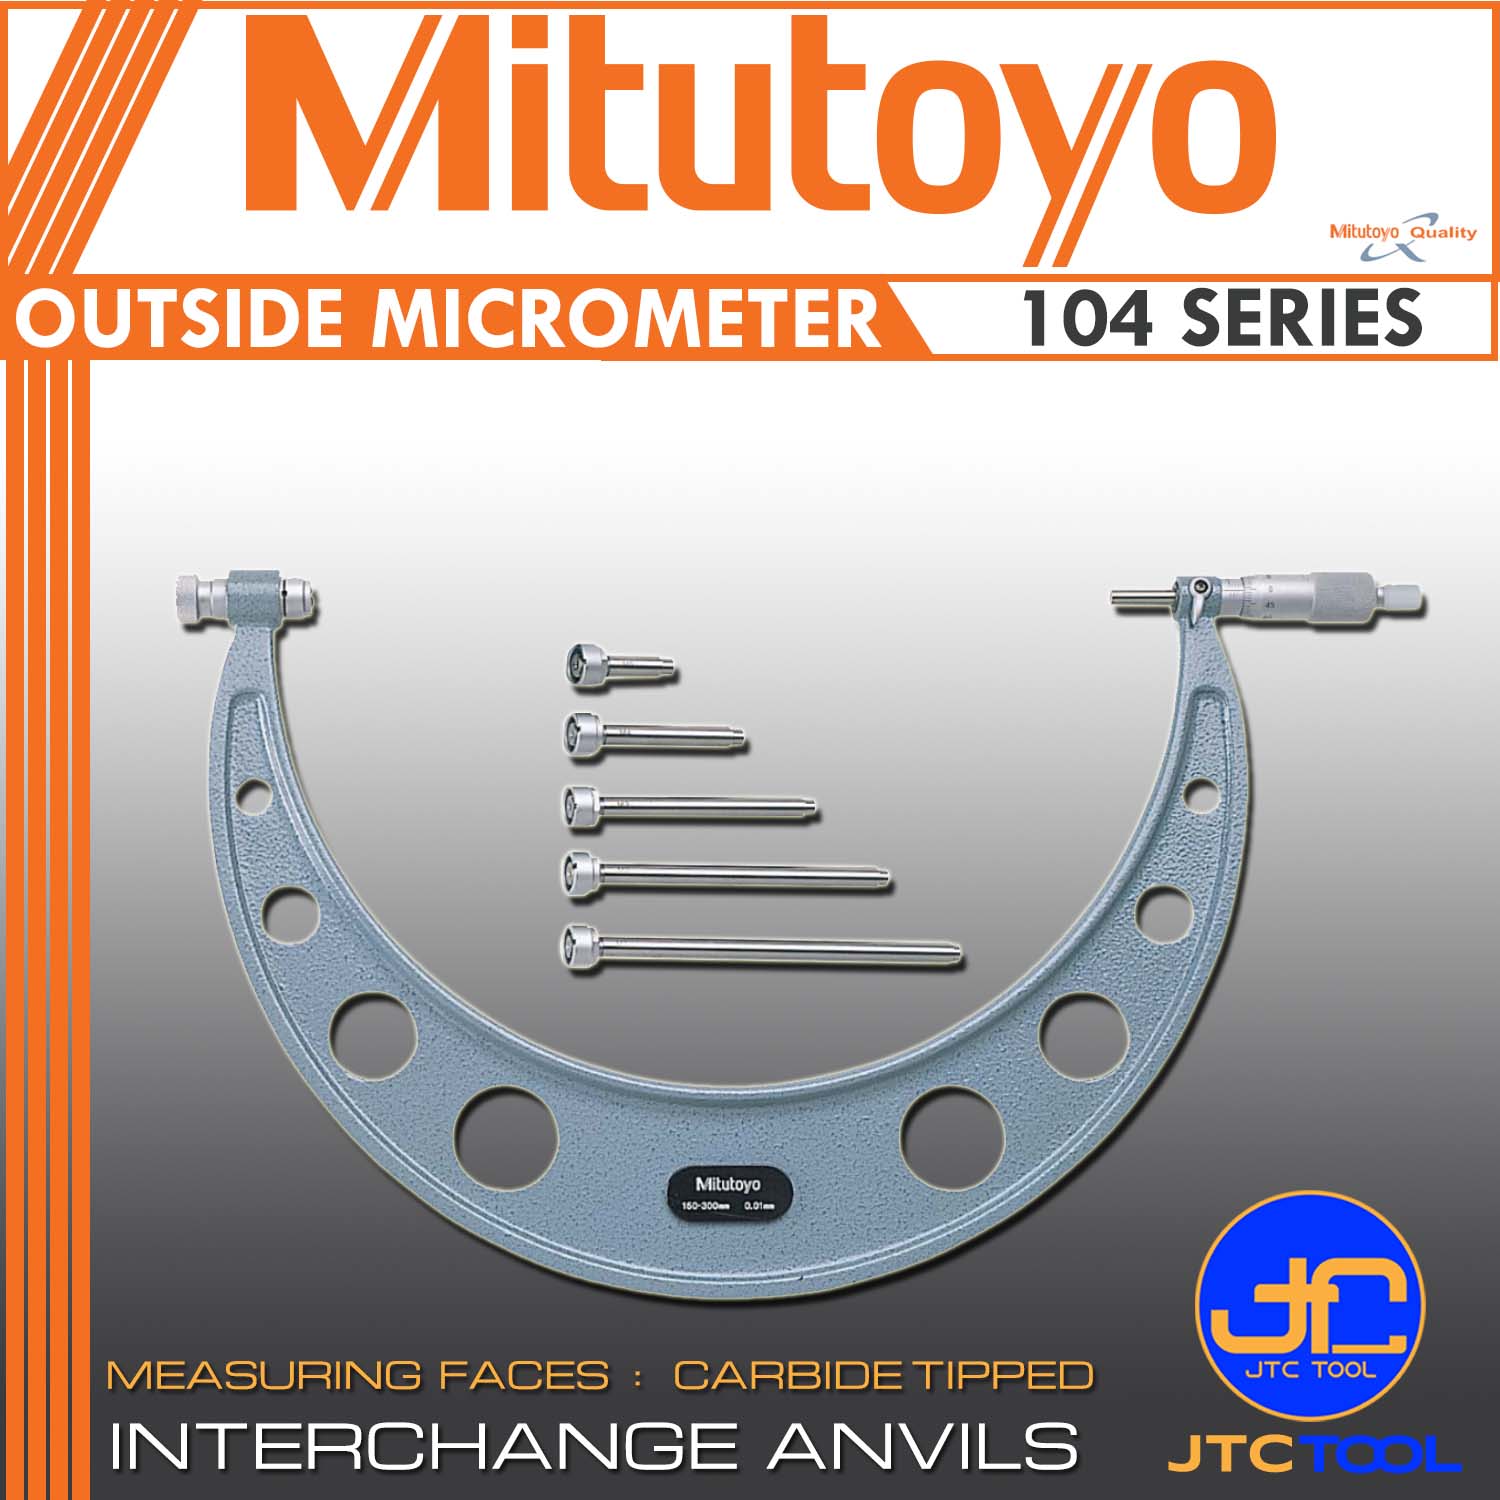 Mitutoyo 104-143A Outside Micrometre with 4 Interchangeable Anvils and 4 Standards 400 mm-500 mm Range 0.01 mm Graduation 